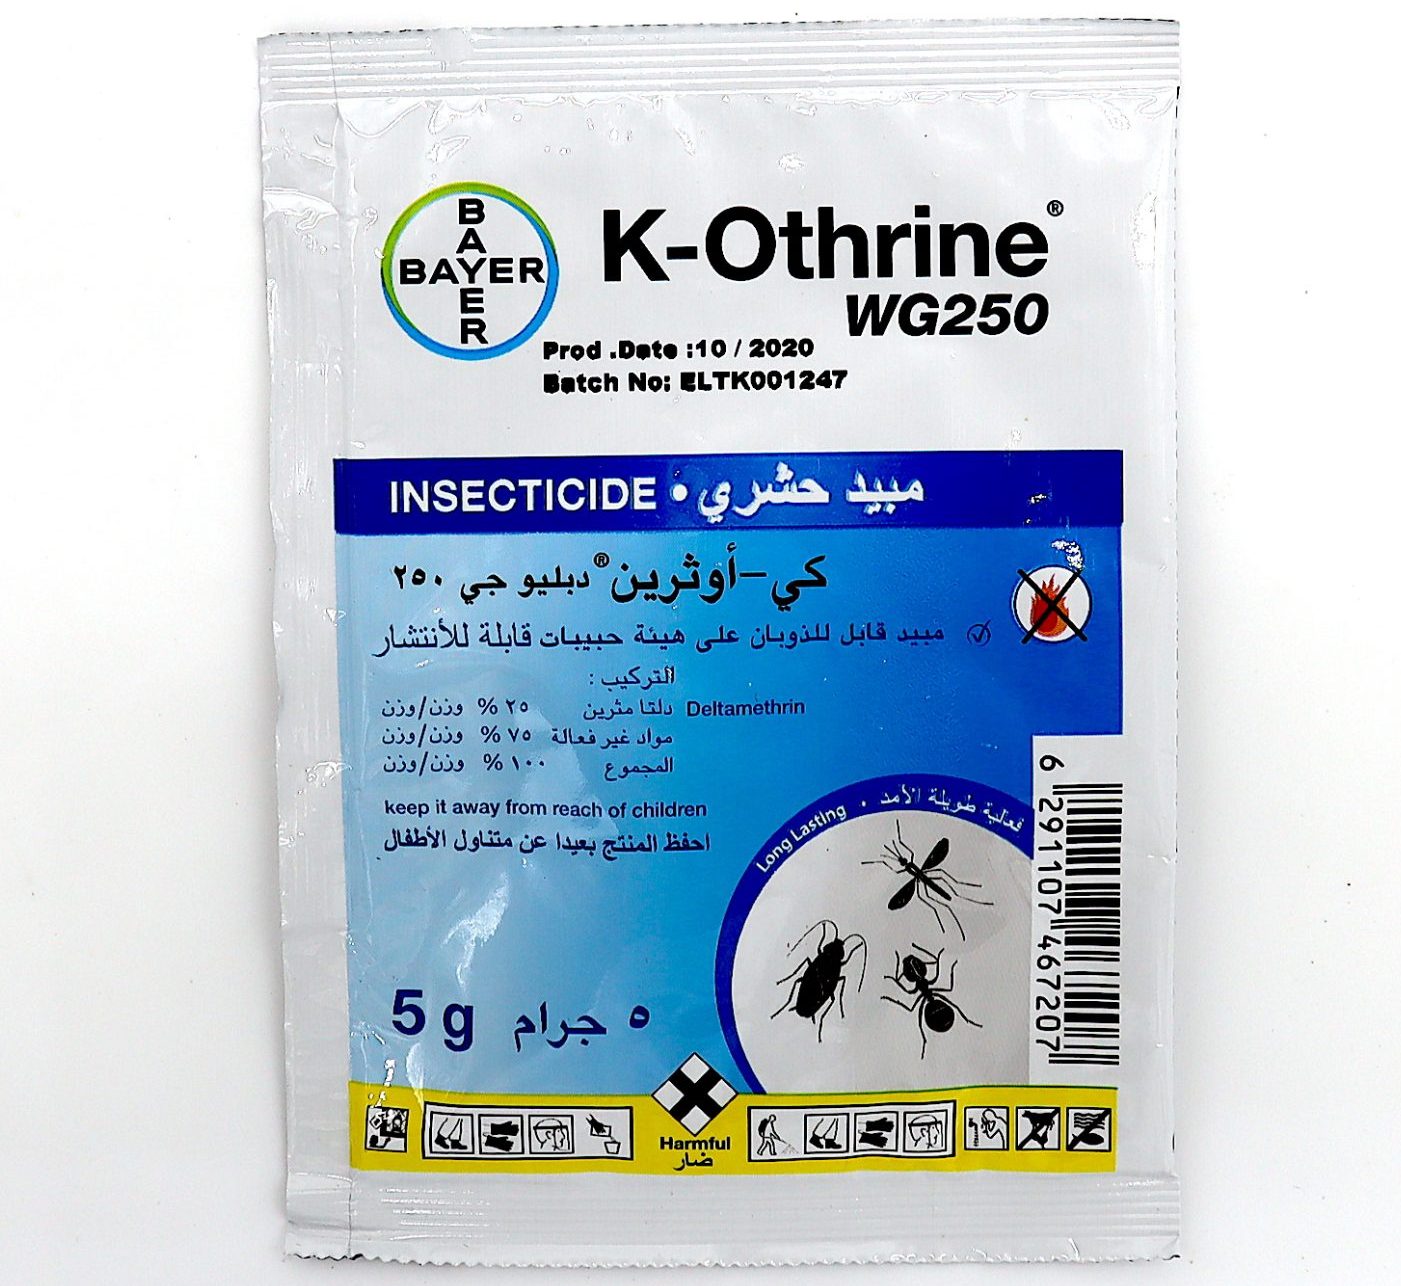 K-Othrine WG 250 "Easy way to eliminate household insects" 5g by BAYER